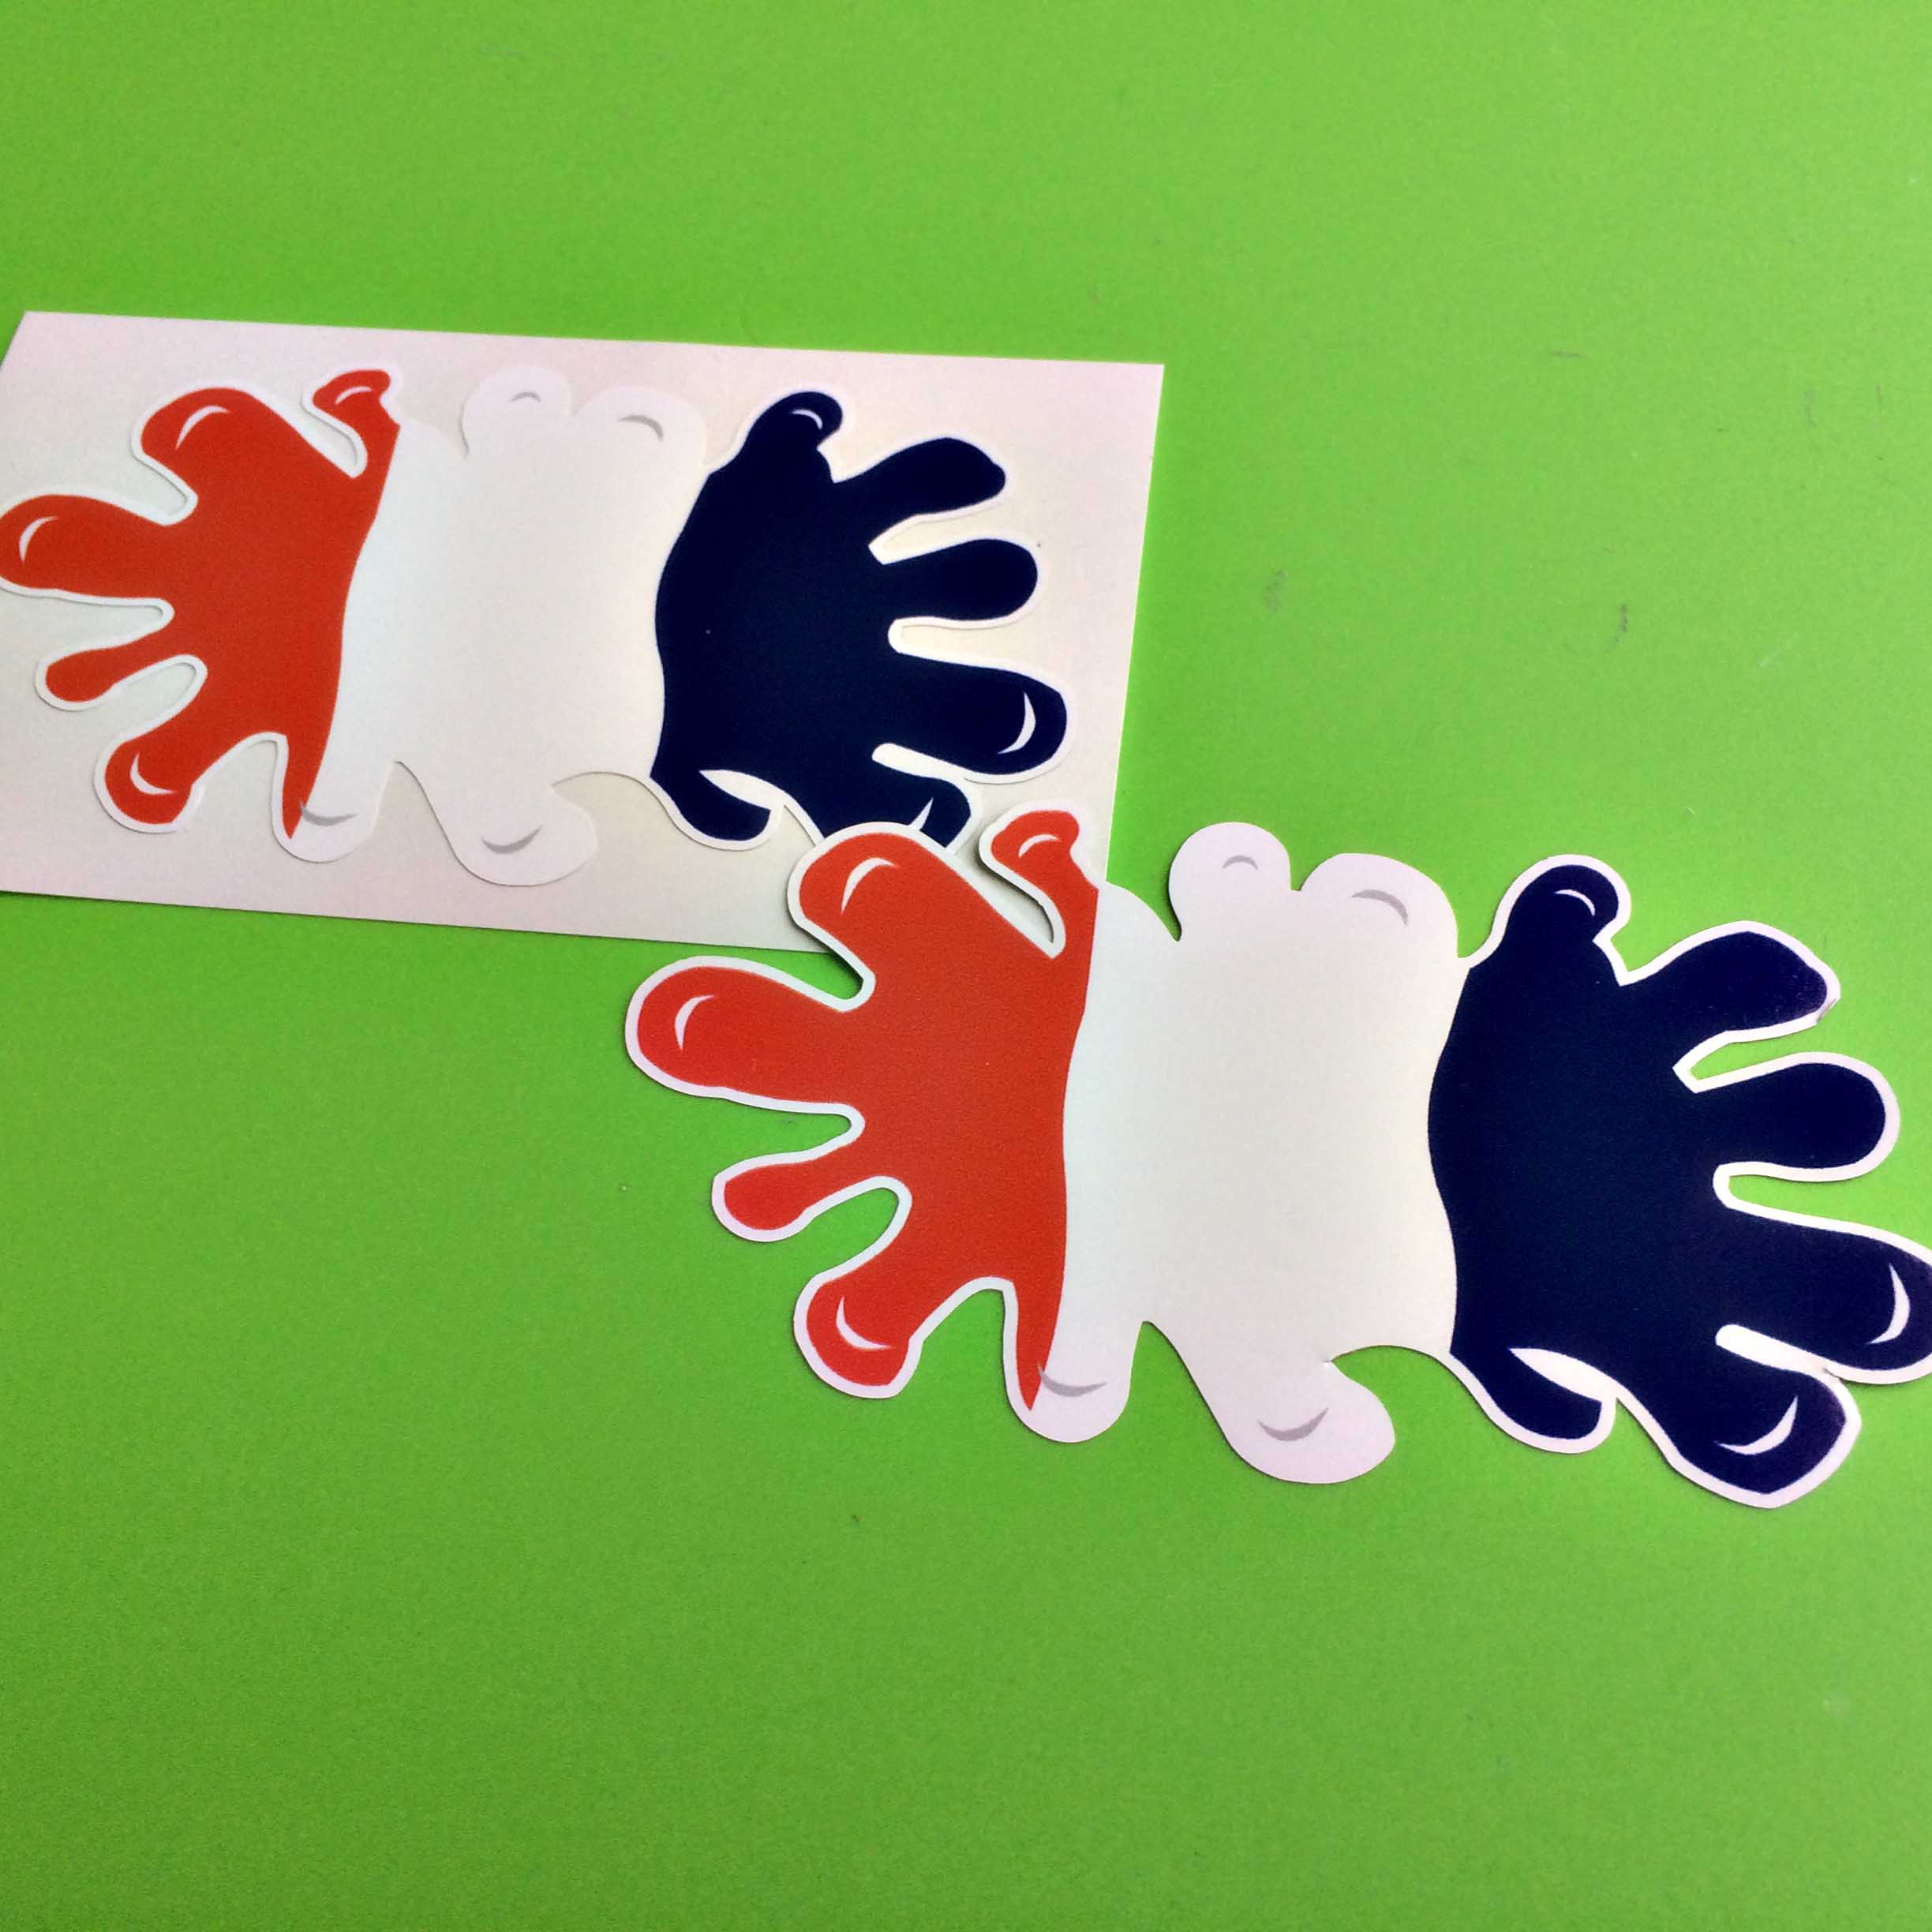 FRANCE/FRENCH FLAG SPLAT STICKERS. The French flag in the shape of a paint splat. A tricolour of three vertical bands in blue, white and red.